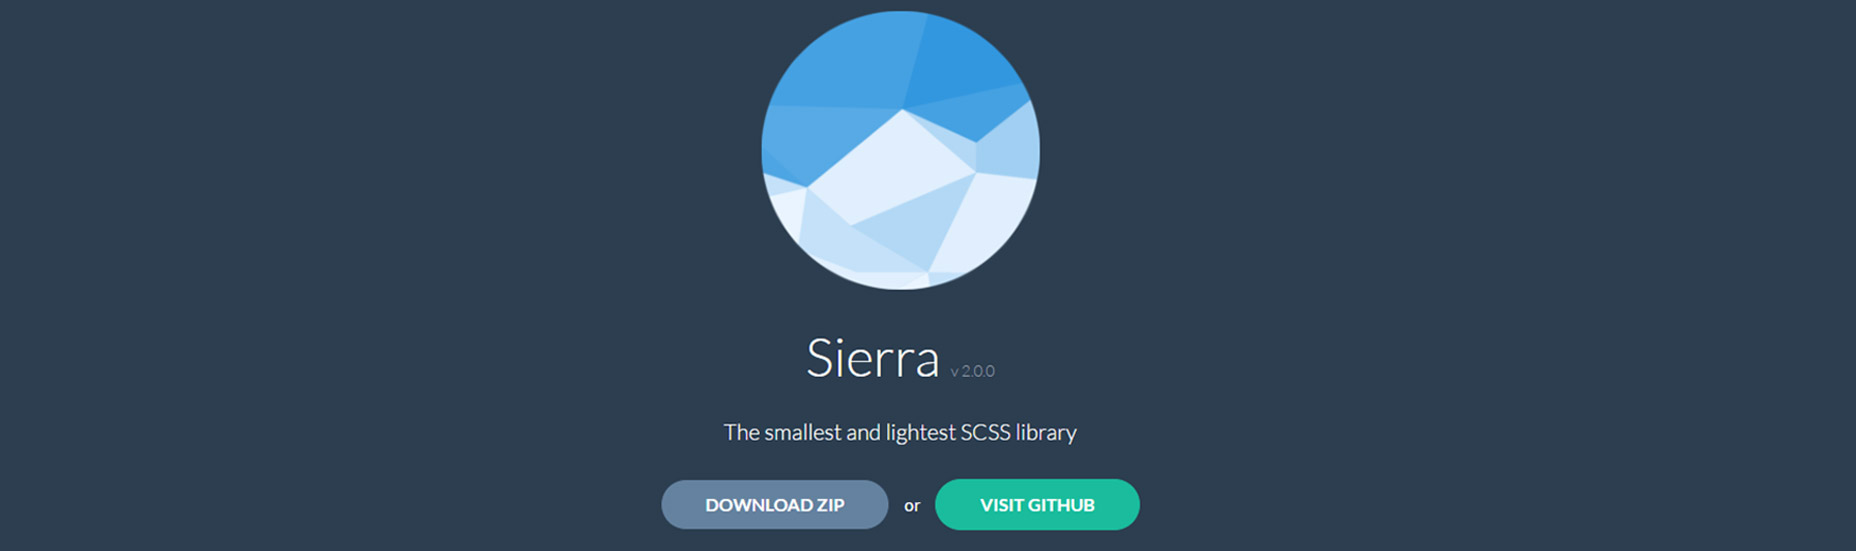 01-sierra-scss-library